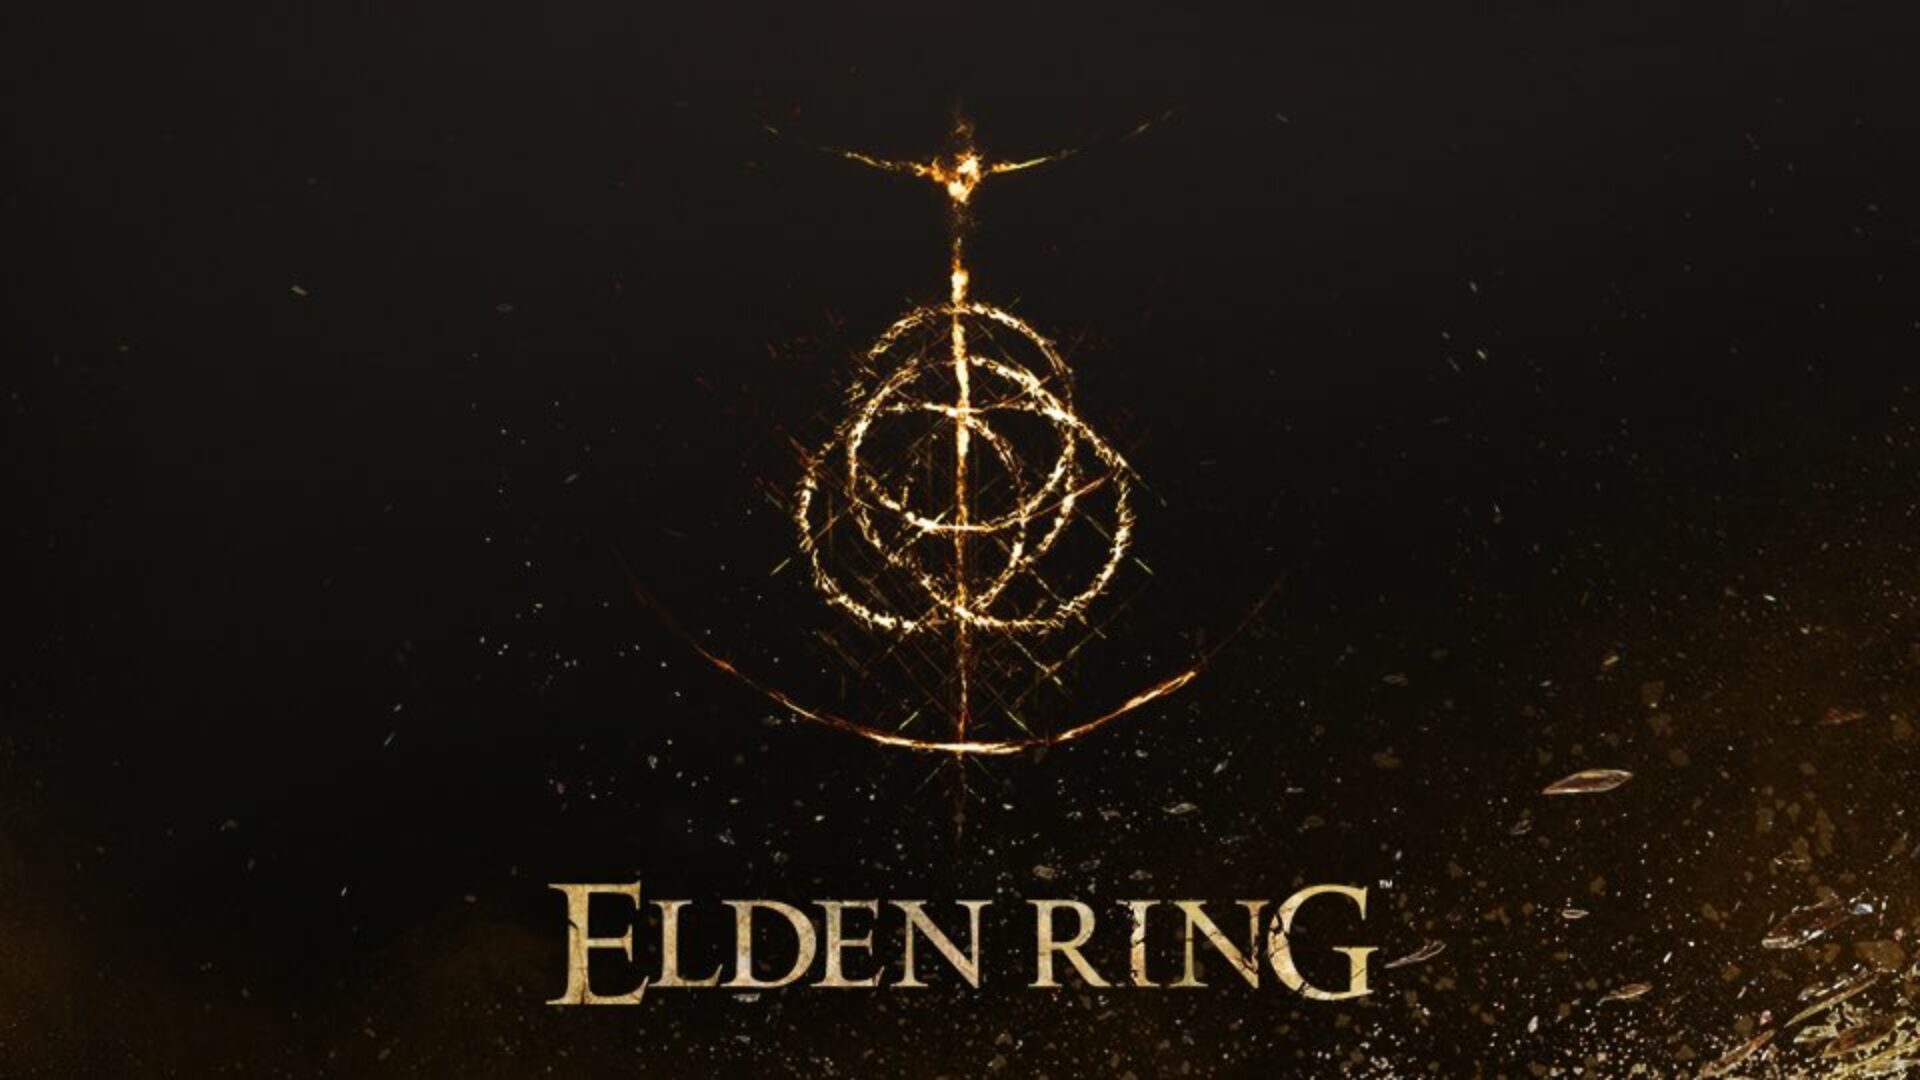 Elden Ring Preview: An Open World Action Adventure Role Playing Game